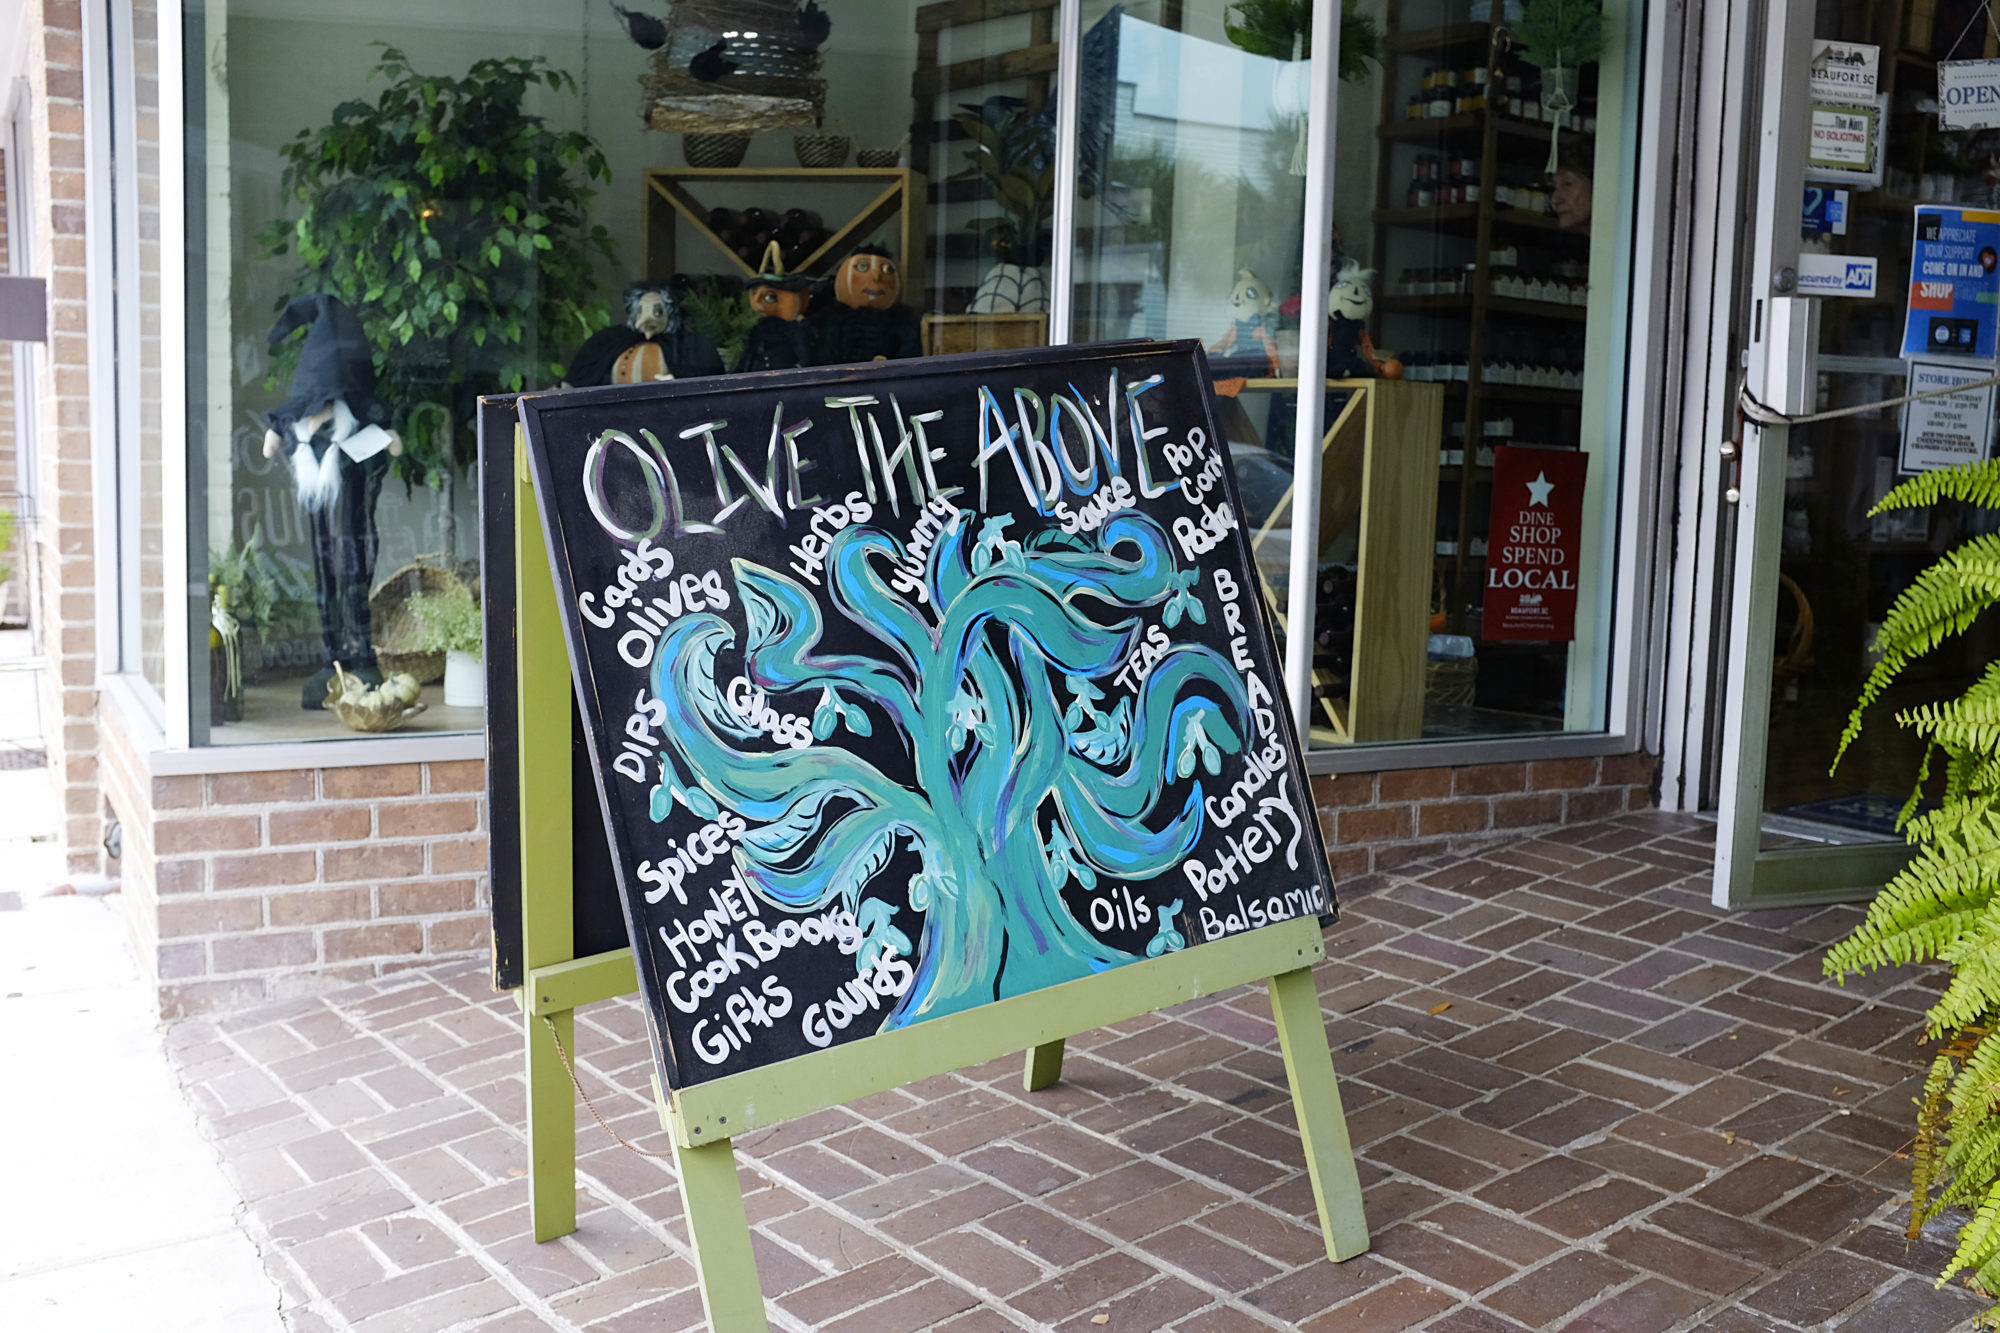 Chalkboard sign that reads "Olive the Above"